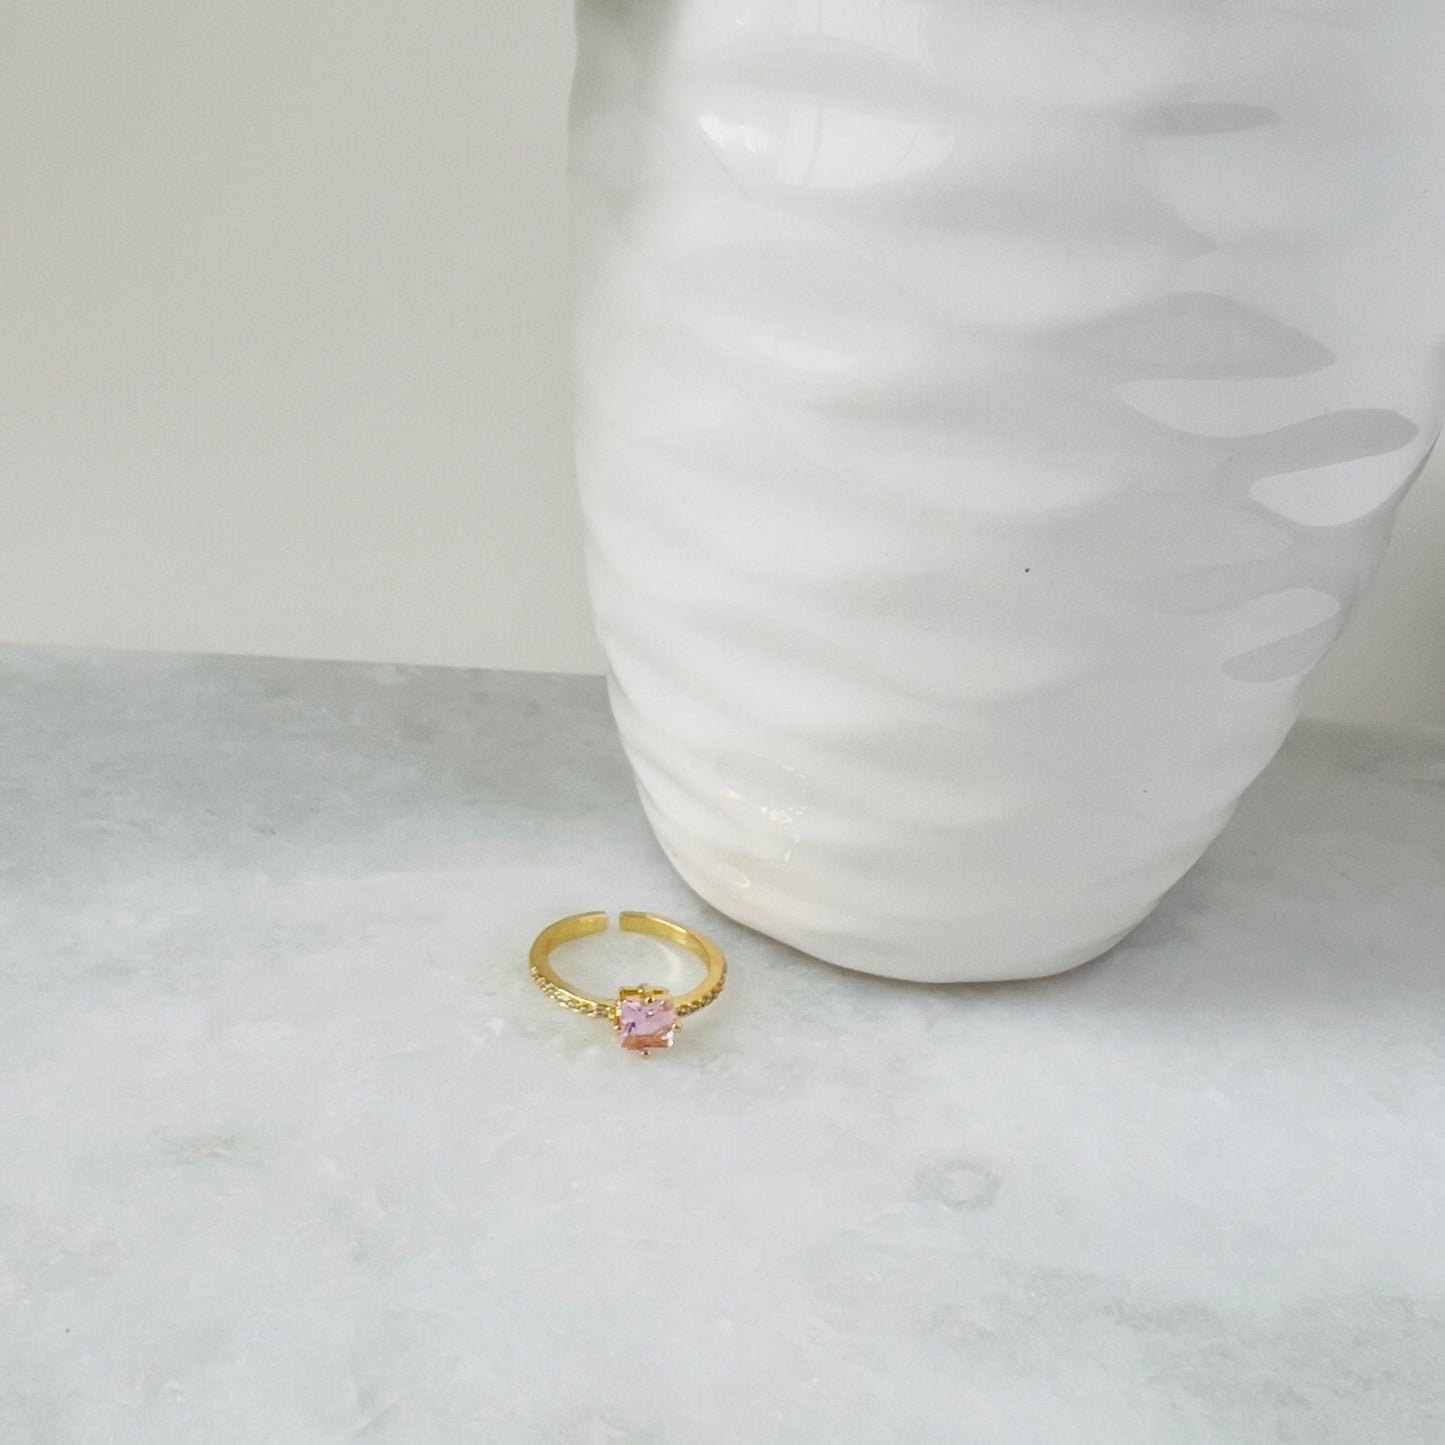 cheap and beautiful gold plated ring with a faux crystal on top for women